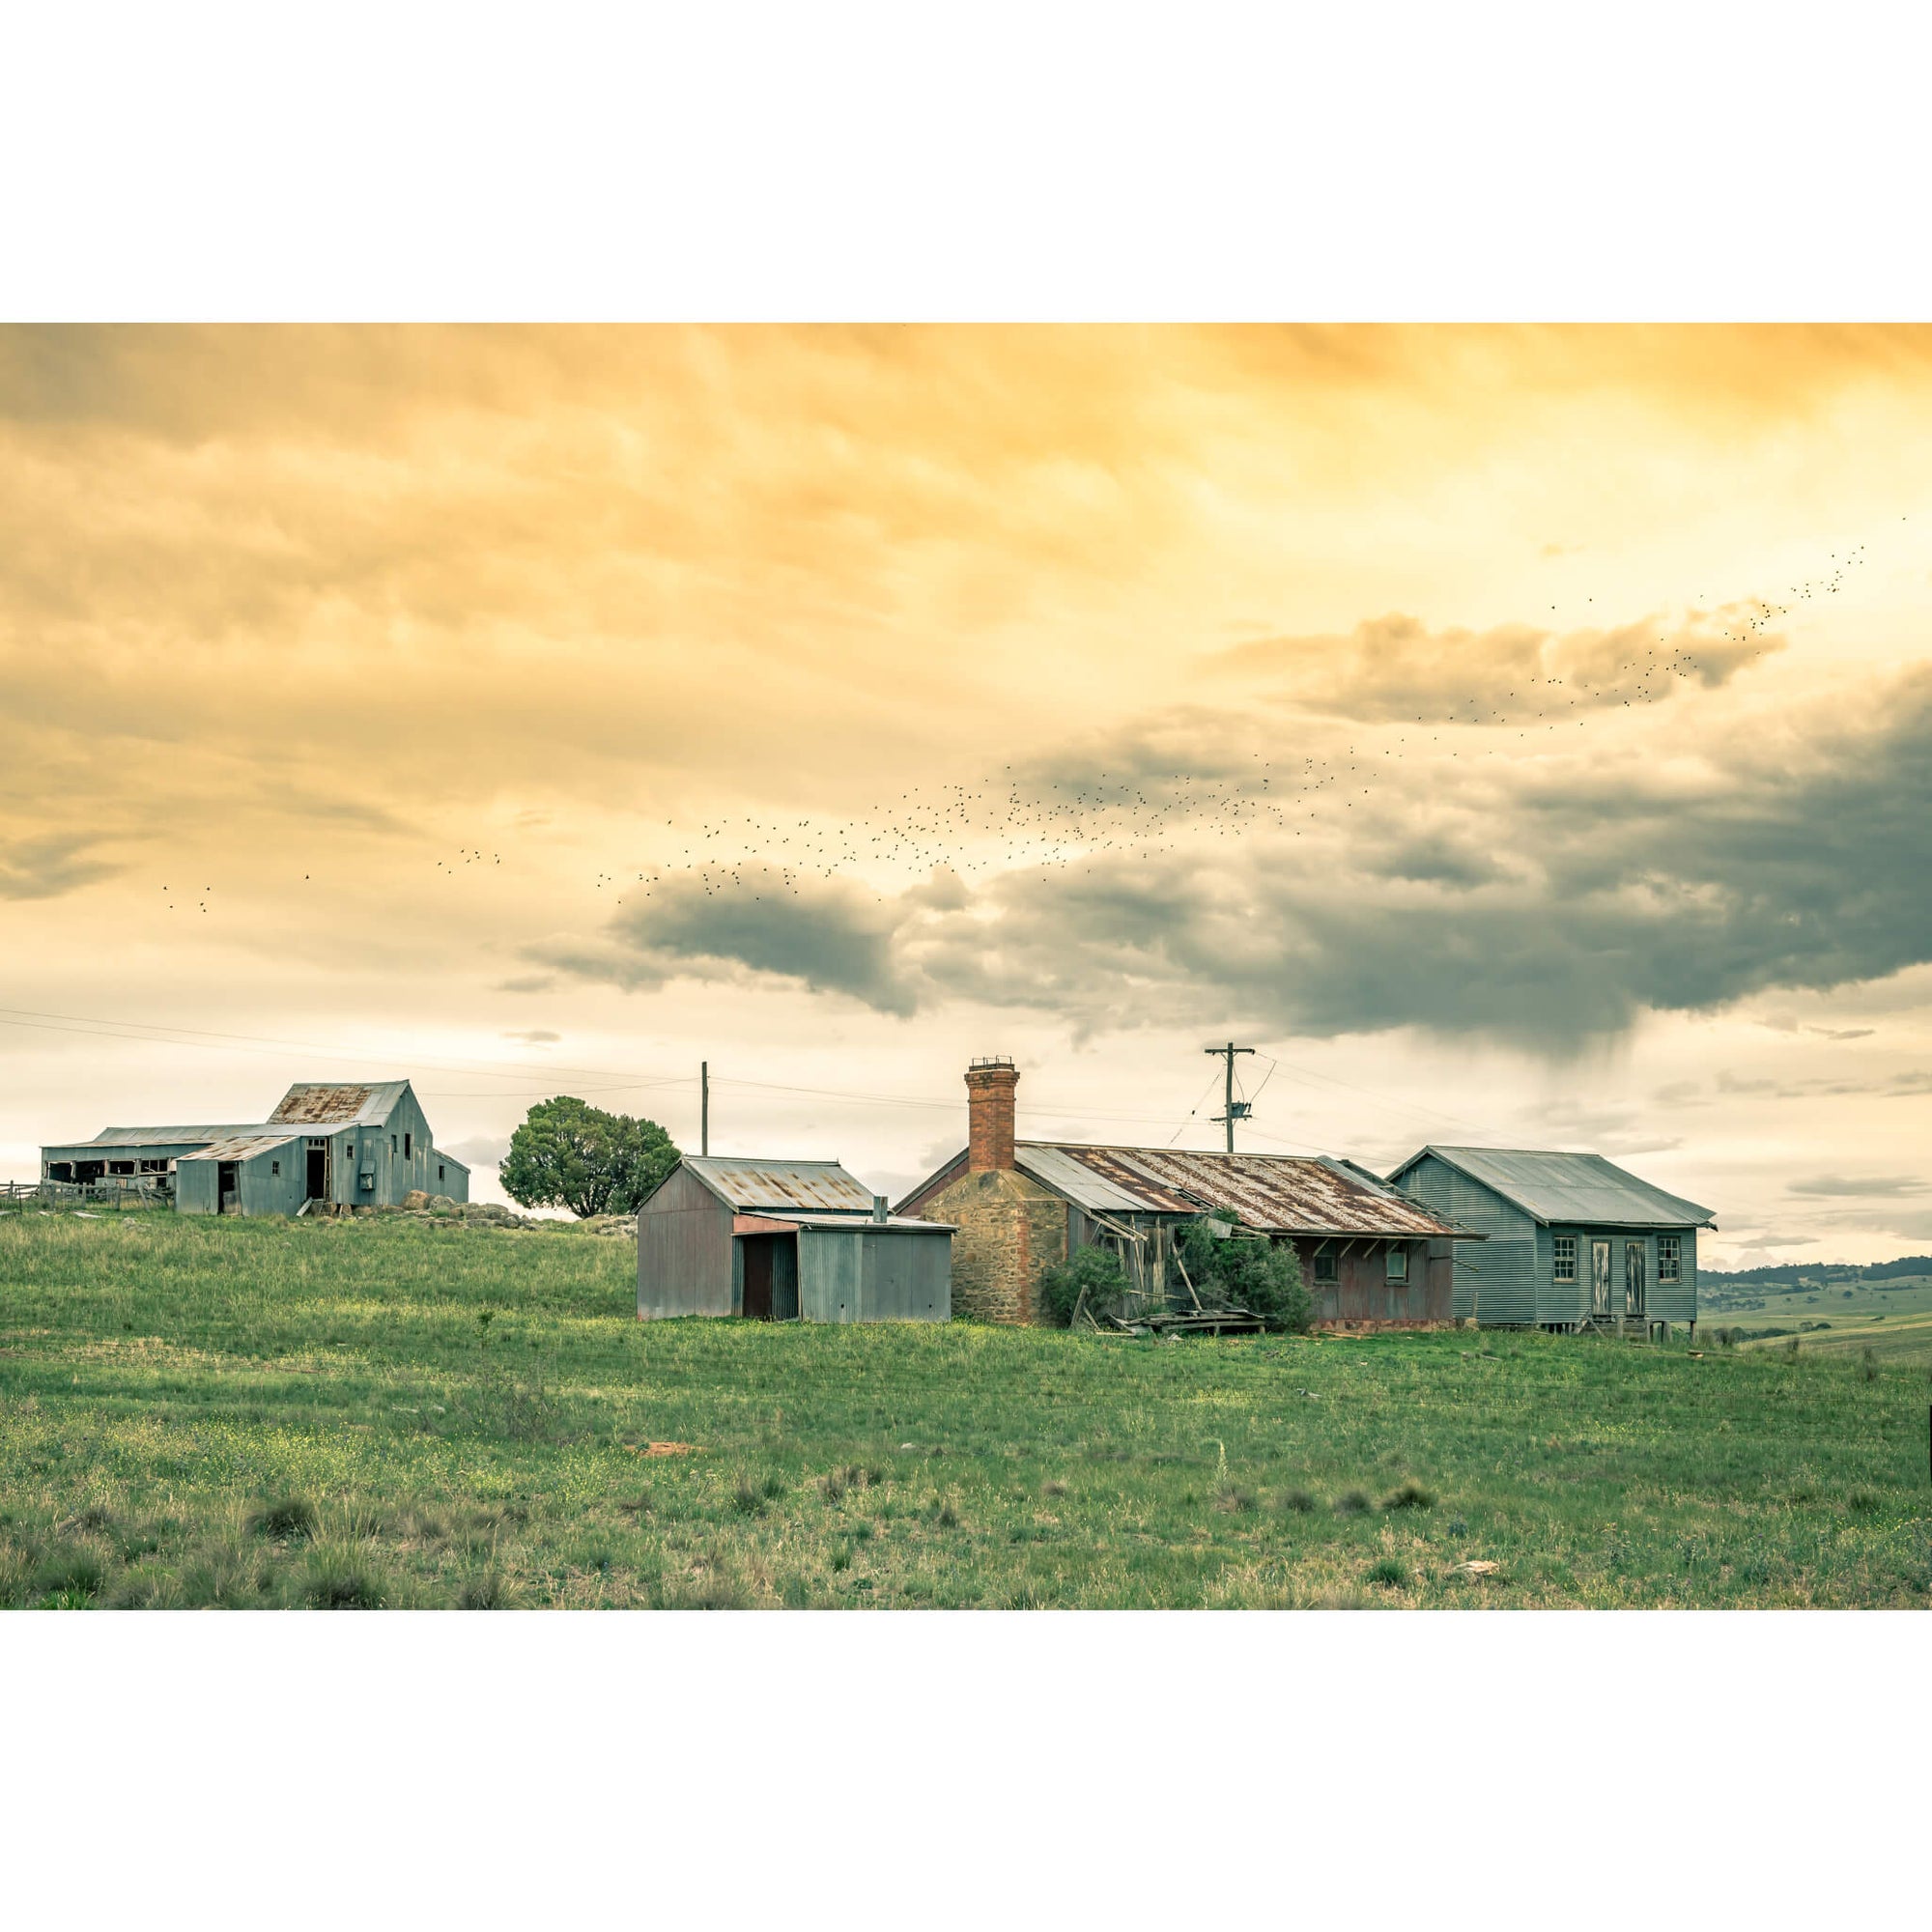 Numbla Vale Cottages & Woolshed | A Place To Call Home Fine Art Print - Lost Collective Shop